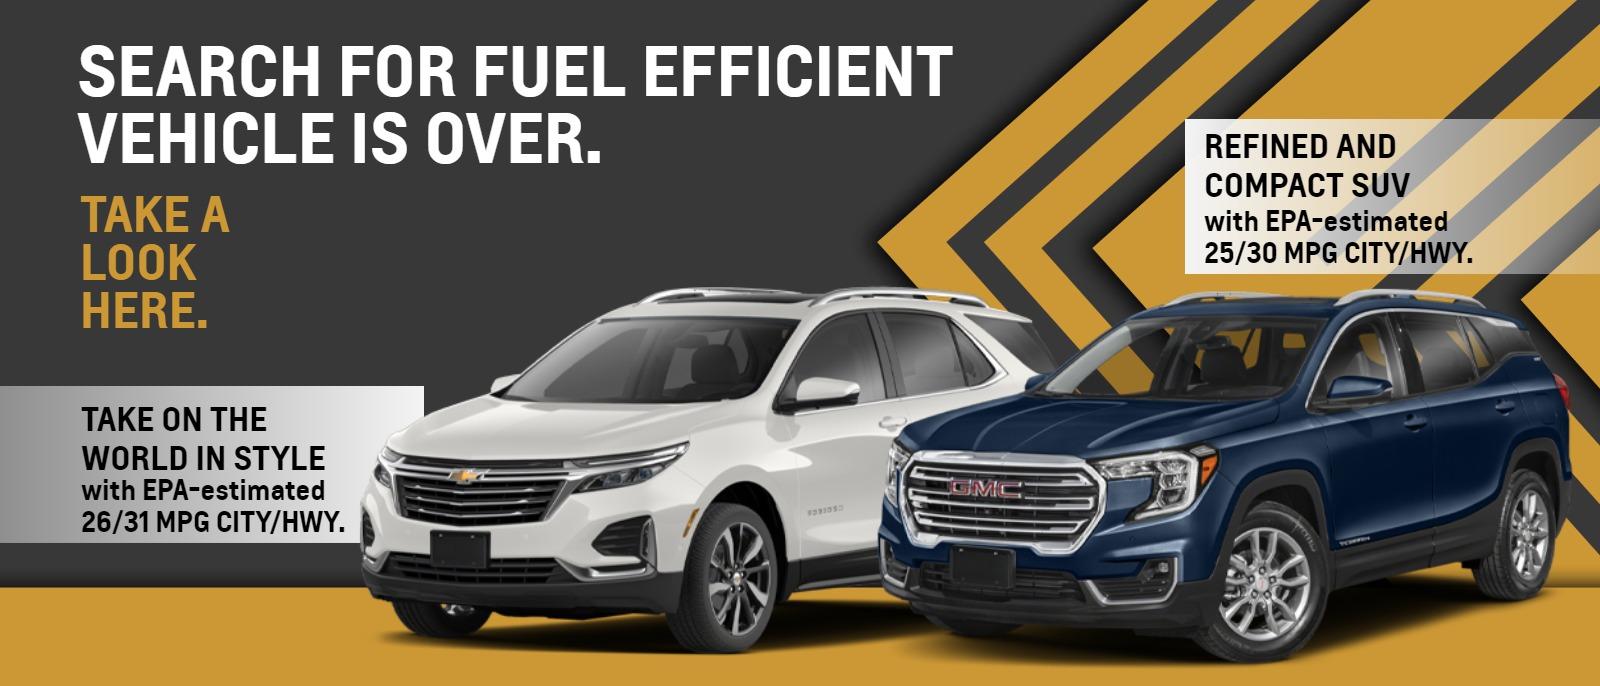 Search For Fuel Efficient Vehicle Is Over. Take A Look Here.
Take on the world in style with EPA-estimated 26/31 MPG CITY/HWY.
Refined and Compact SUV with EPA-estimated 25/30 MPG CITY/HWY.